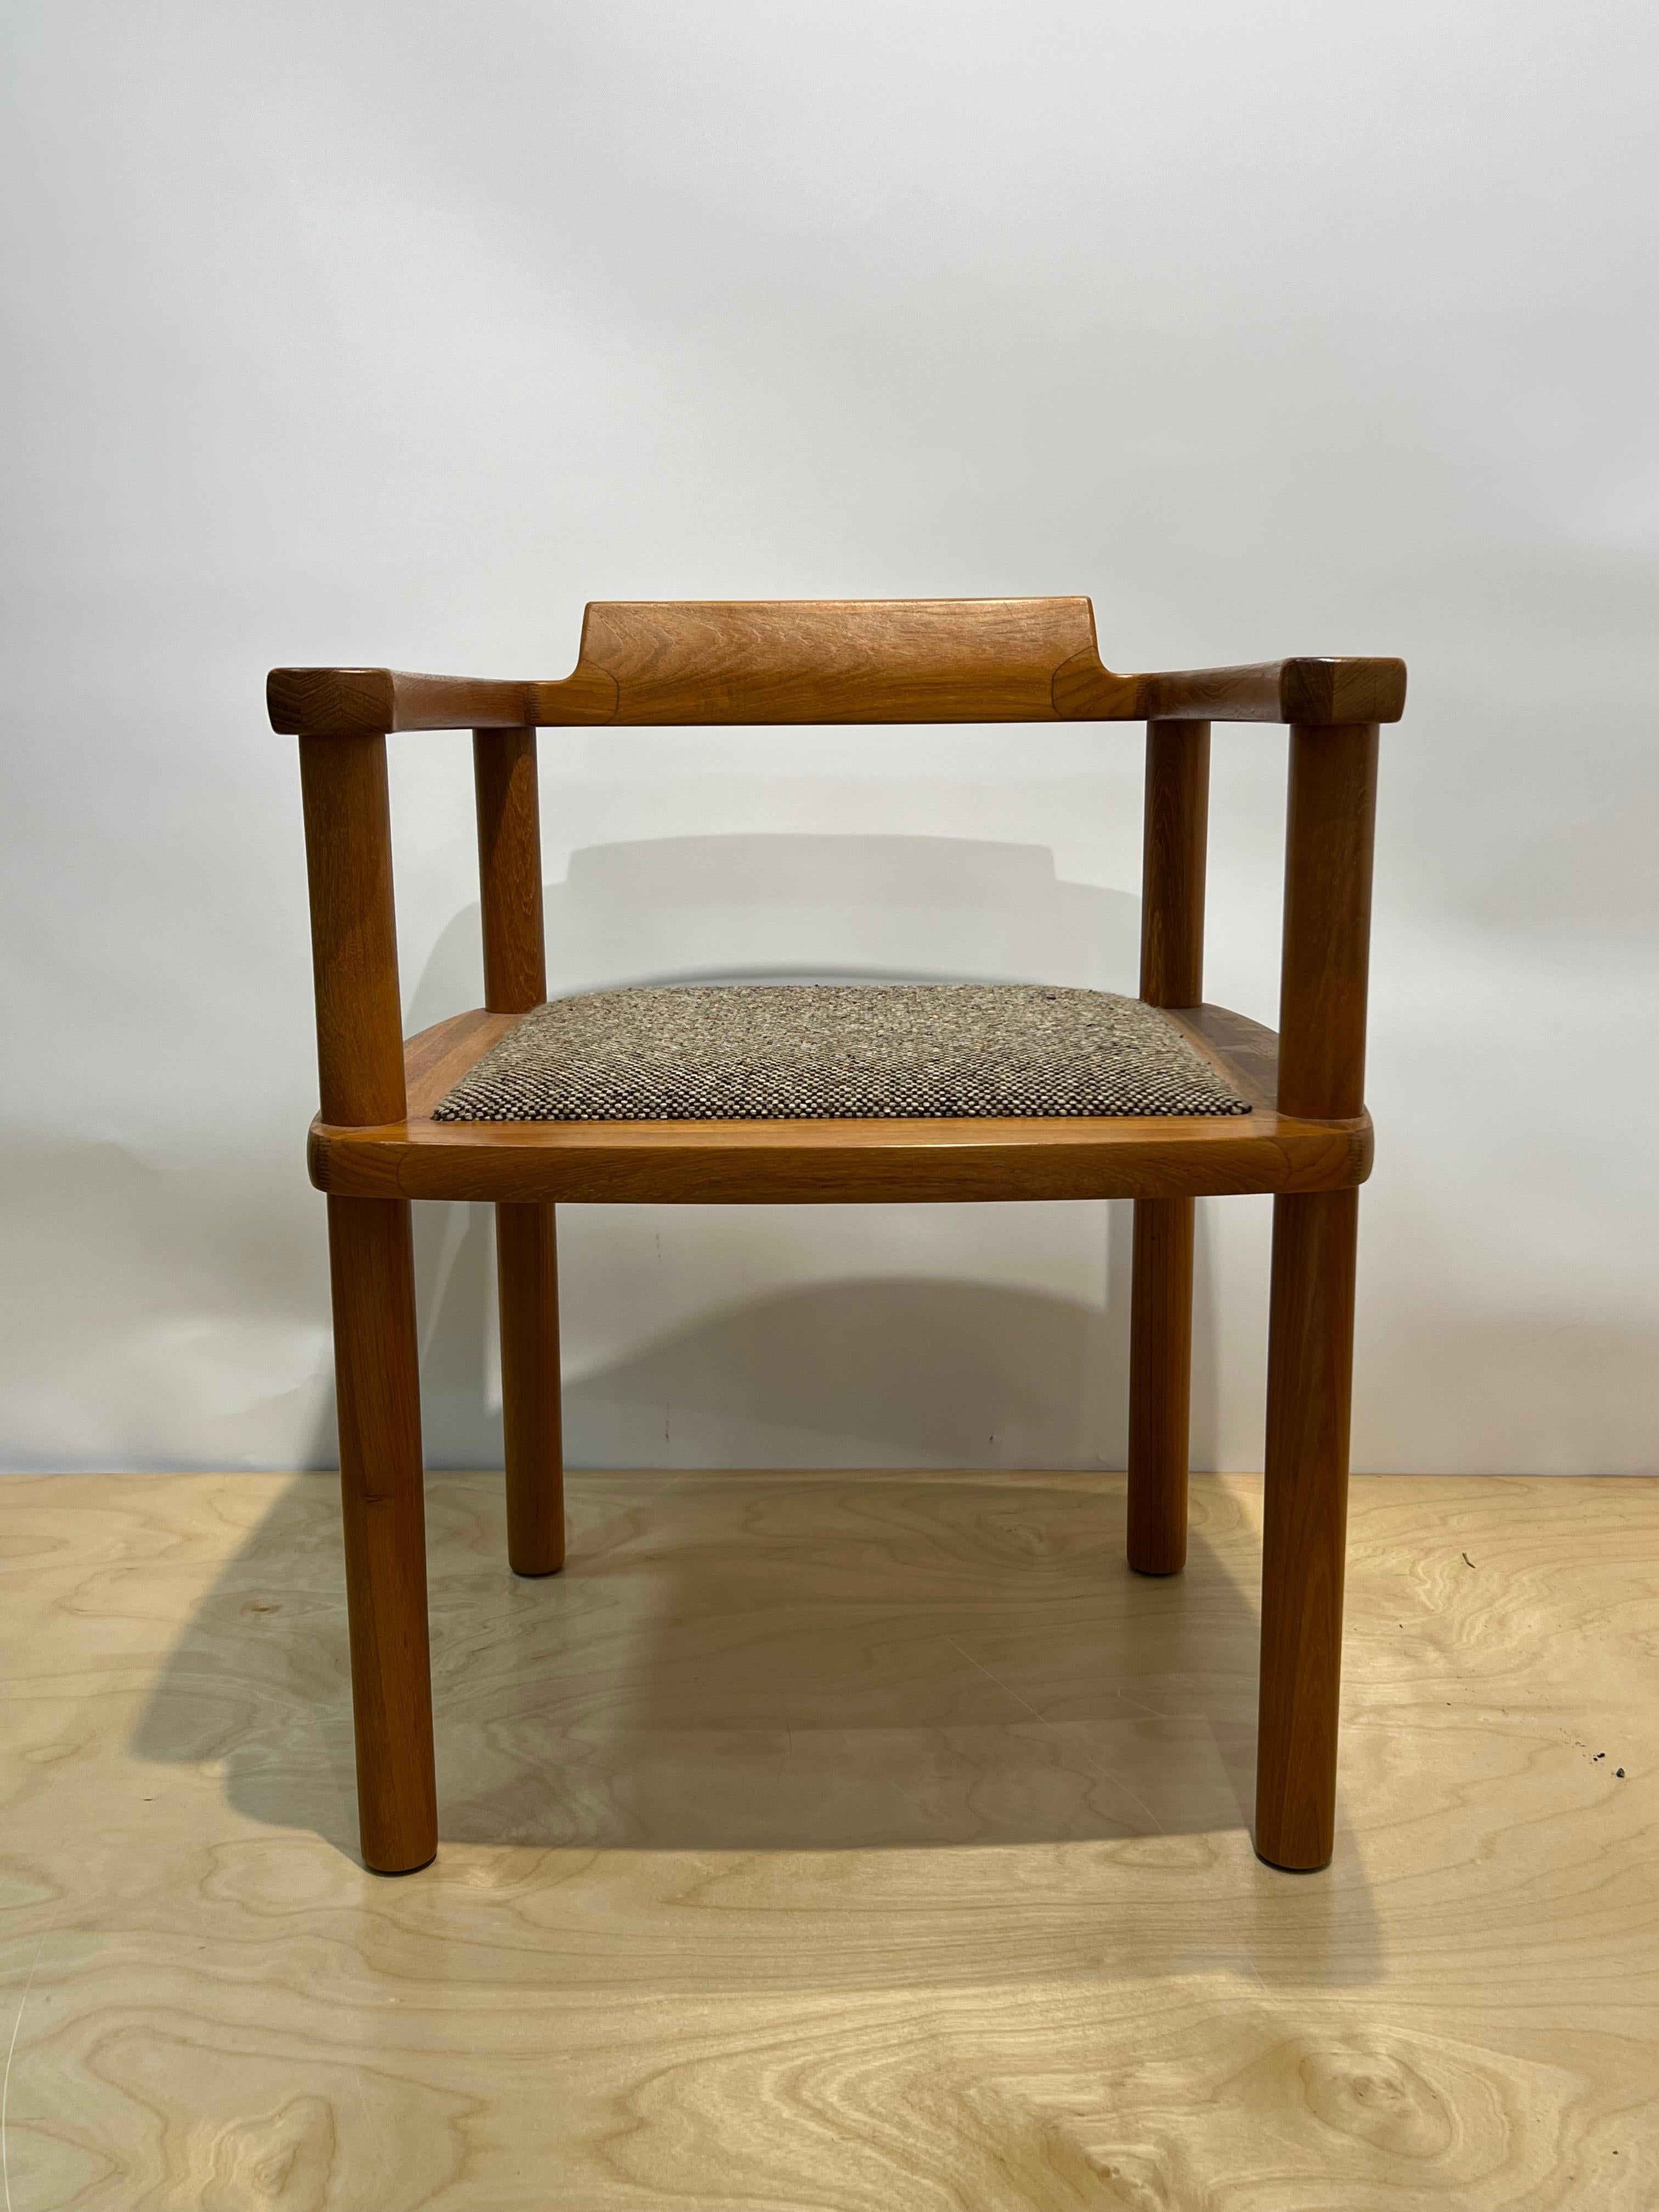 Stunning arm chair by Scandinavian designer Richard Nissen c1979. Most likely a prototype chair. Many hours of researching this chair, only to find no info out there, or anything even close. Signed with designer label. Very unique design with